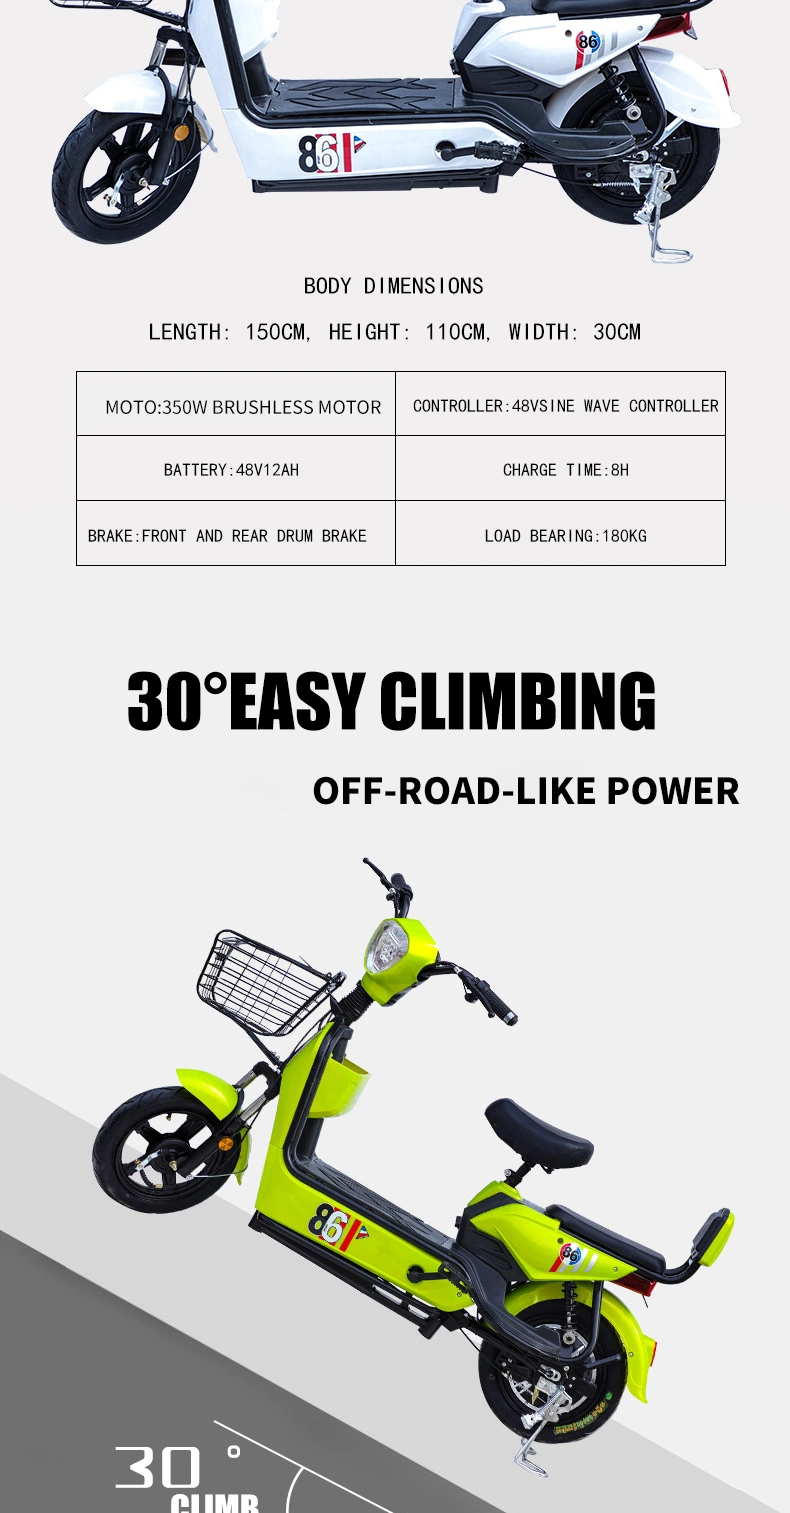 350W Lithium Power Bicycle 48V12A E Scooter Not Foldable Electric Bike with Children Brand Ueasy Dirt Bike E-Bike